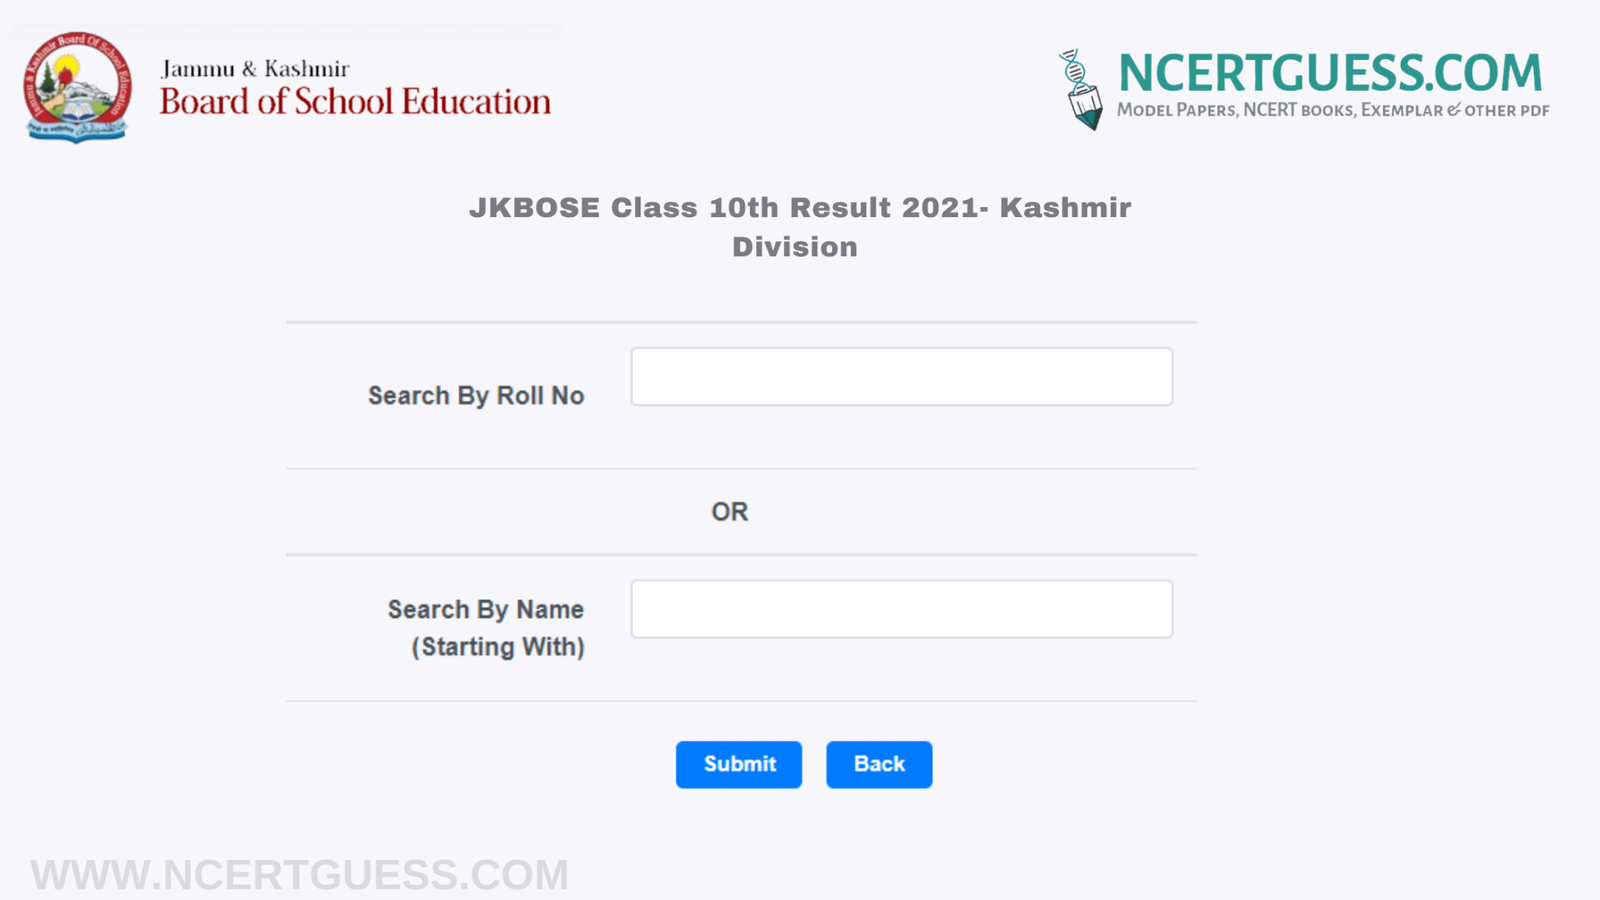 JKBOSE Result 10th Class jkbose.ac.in Name And Roll Number Wise